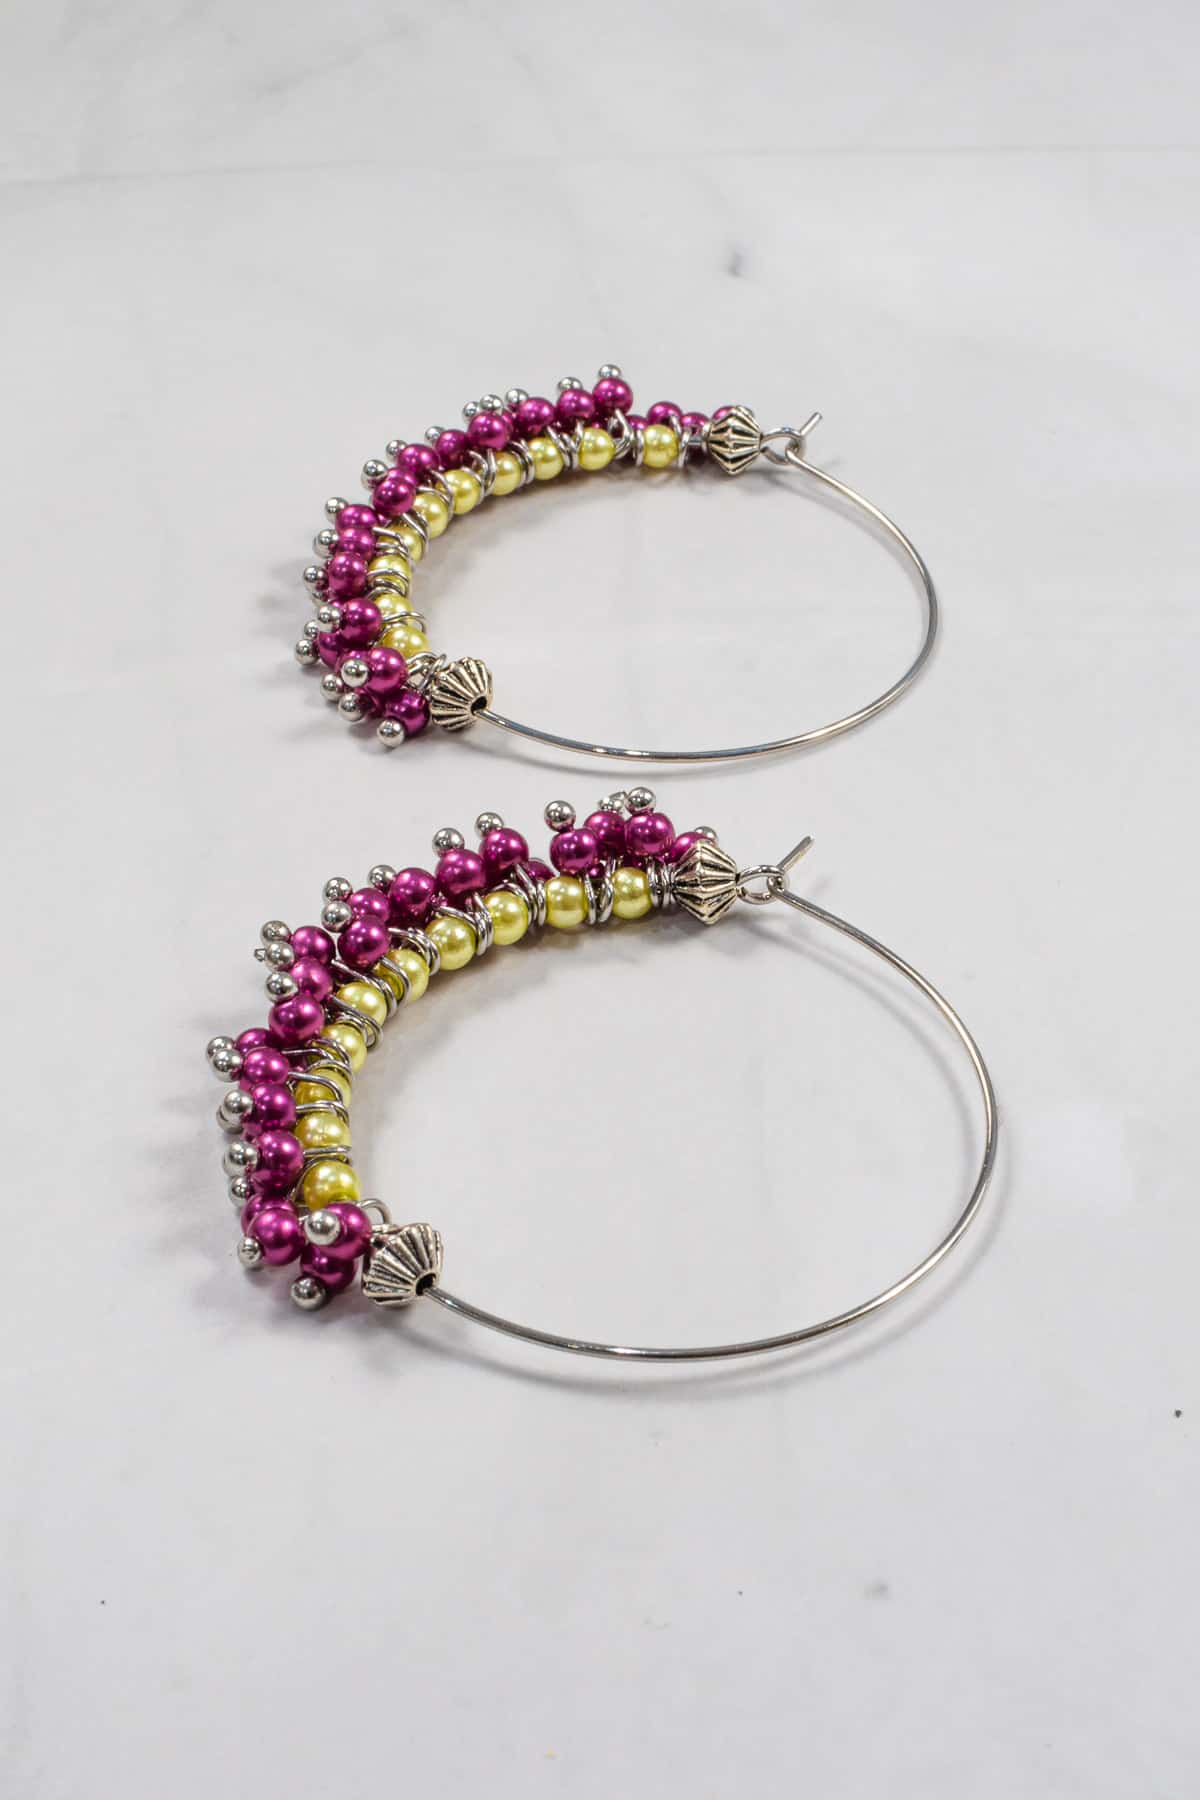 A pair of seed bead earrings in purple and green.